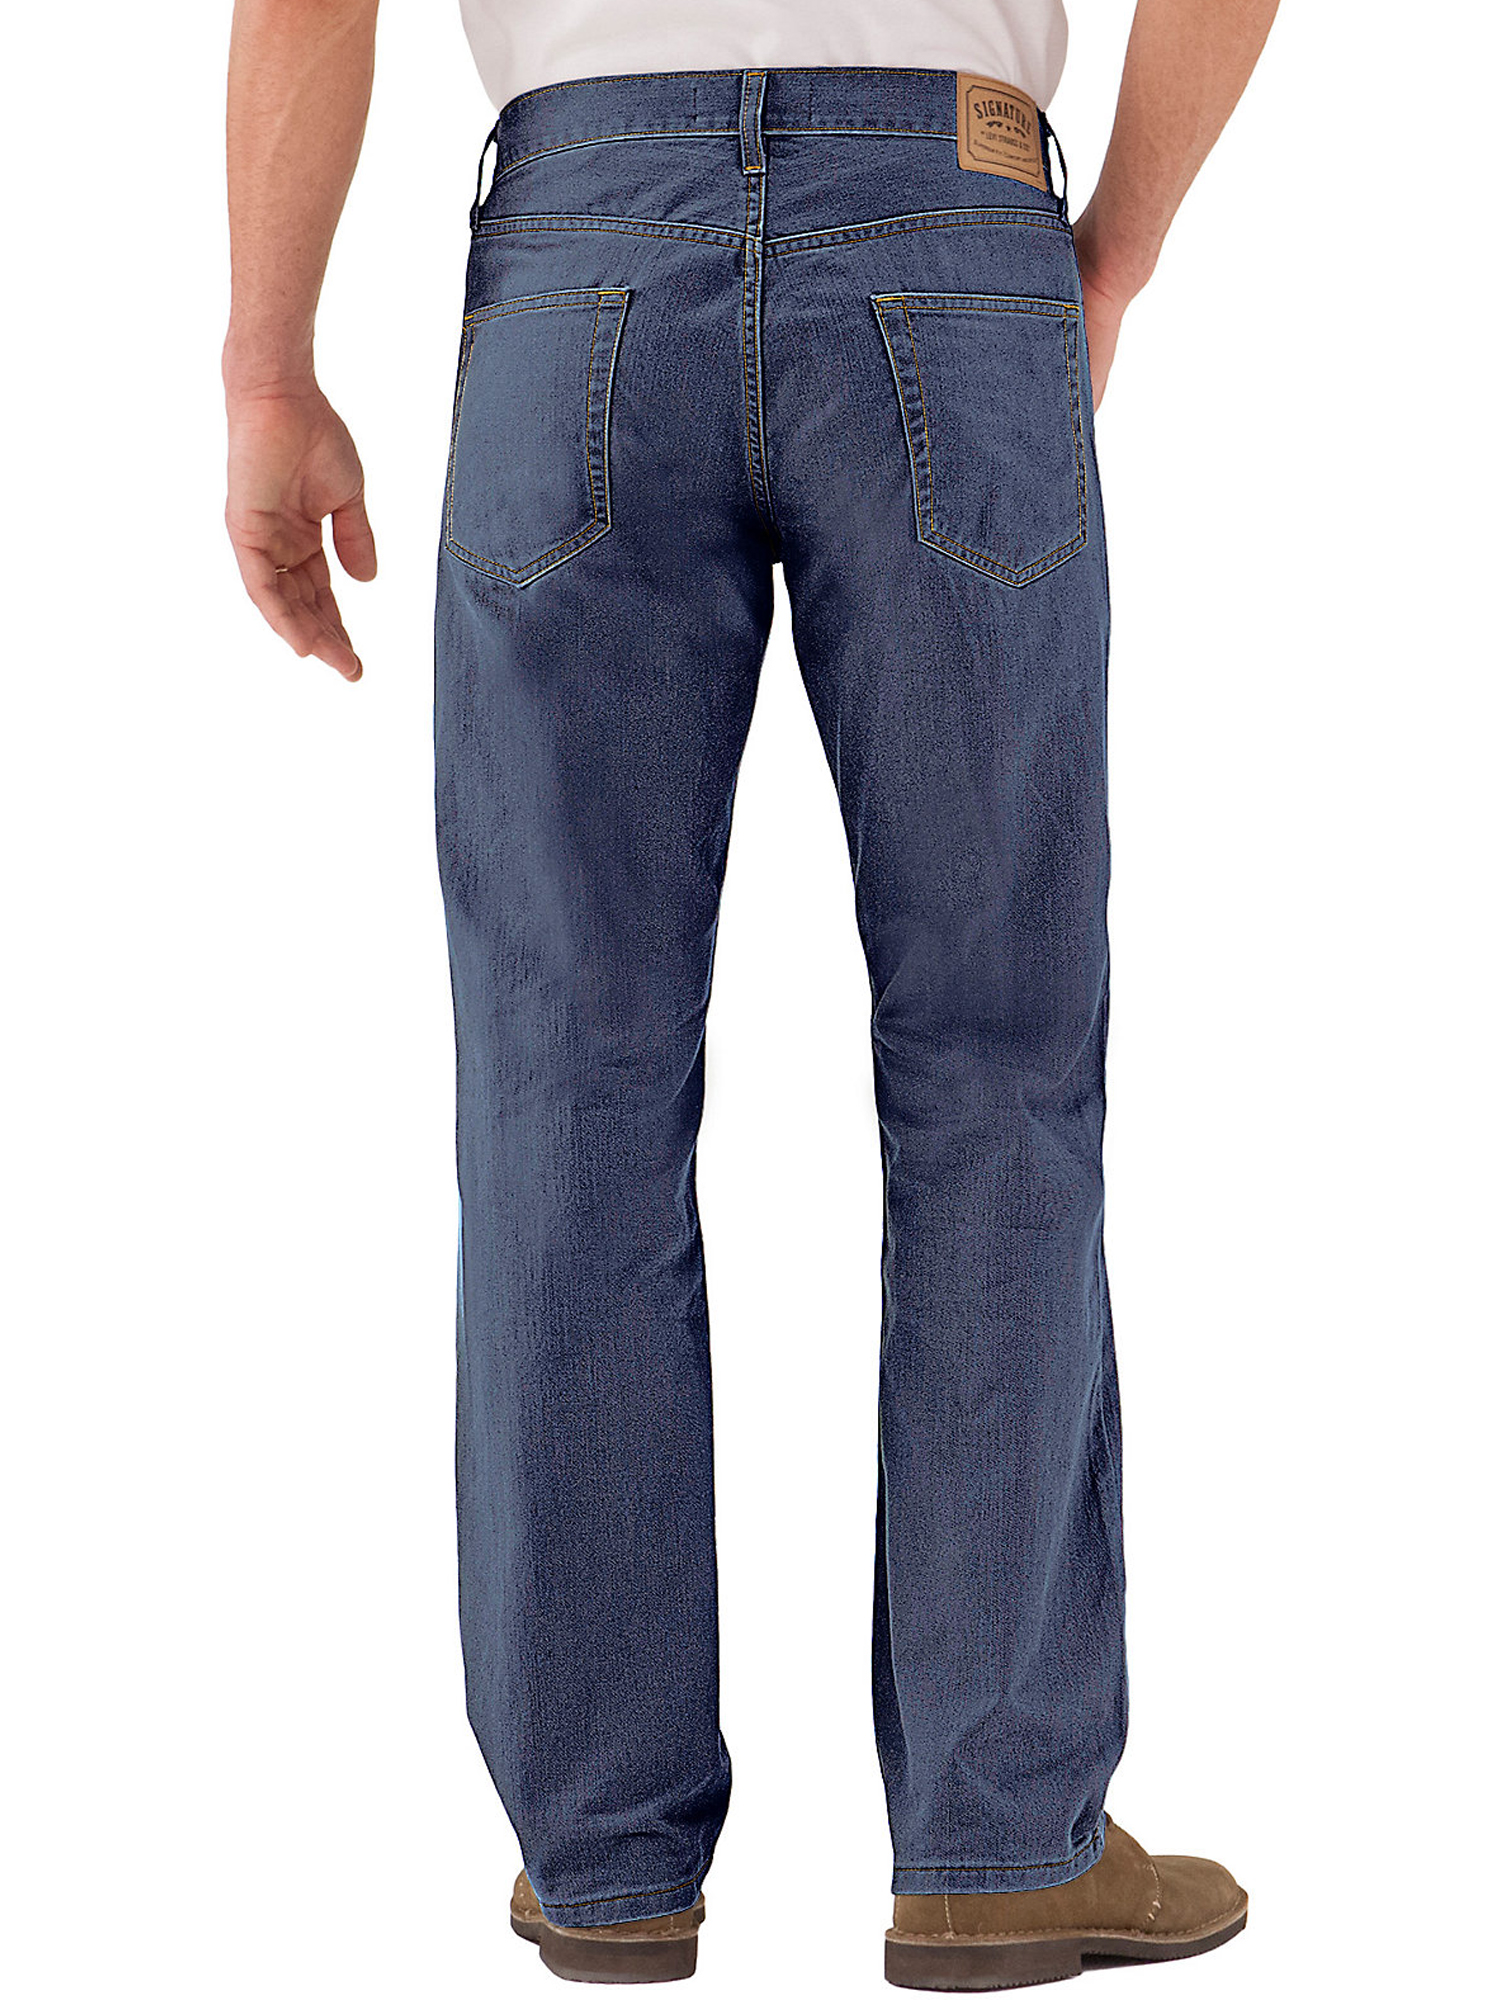 Signature by Levi Strauss & Co. Men's and Big and Tall Relaxed Fit Jeans - image 3 of 6